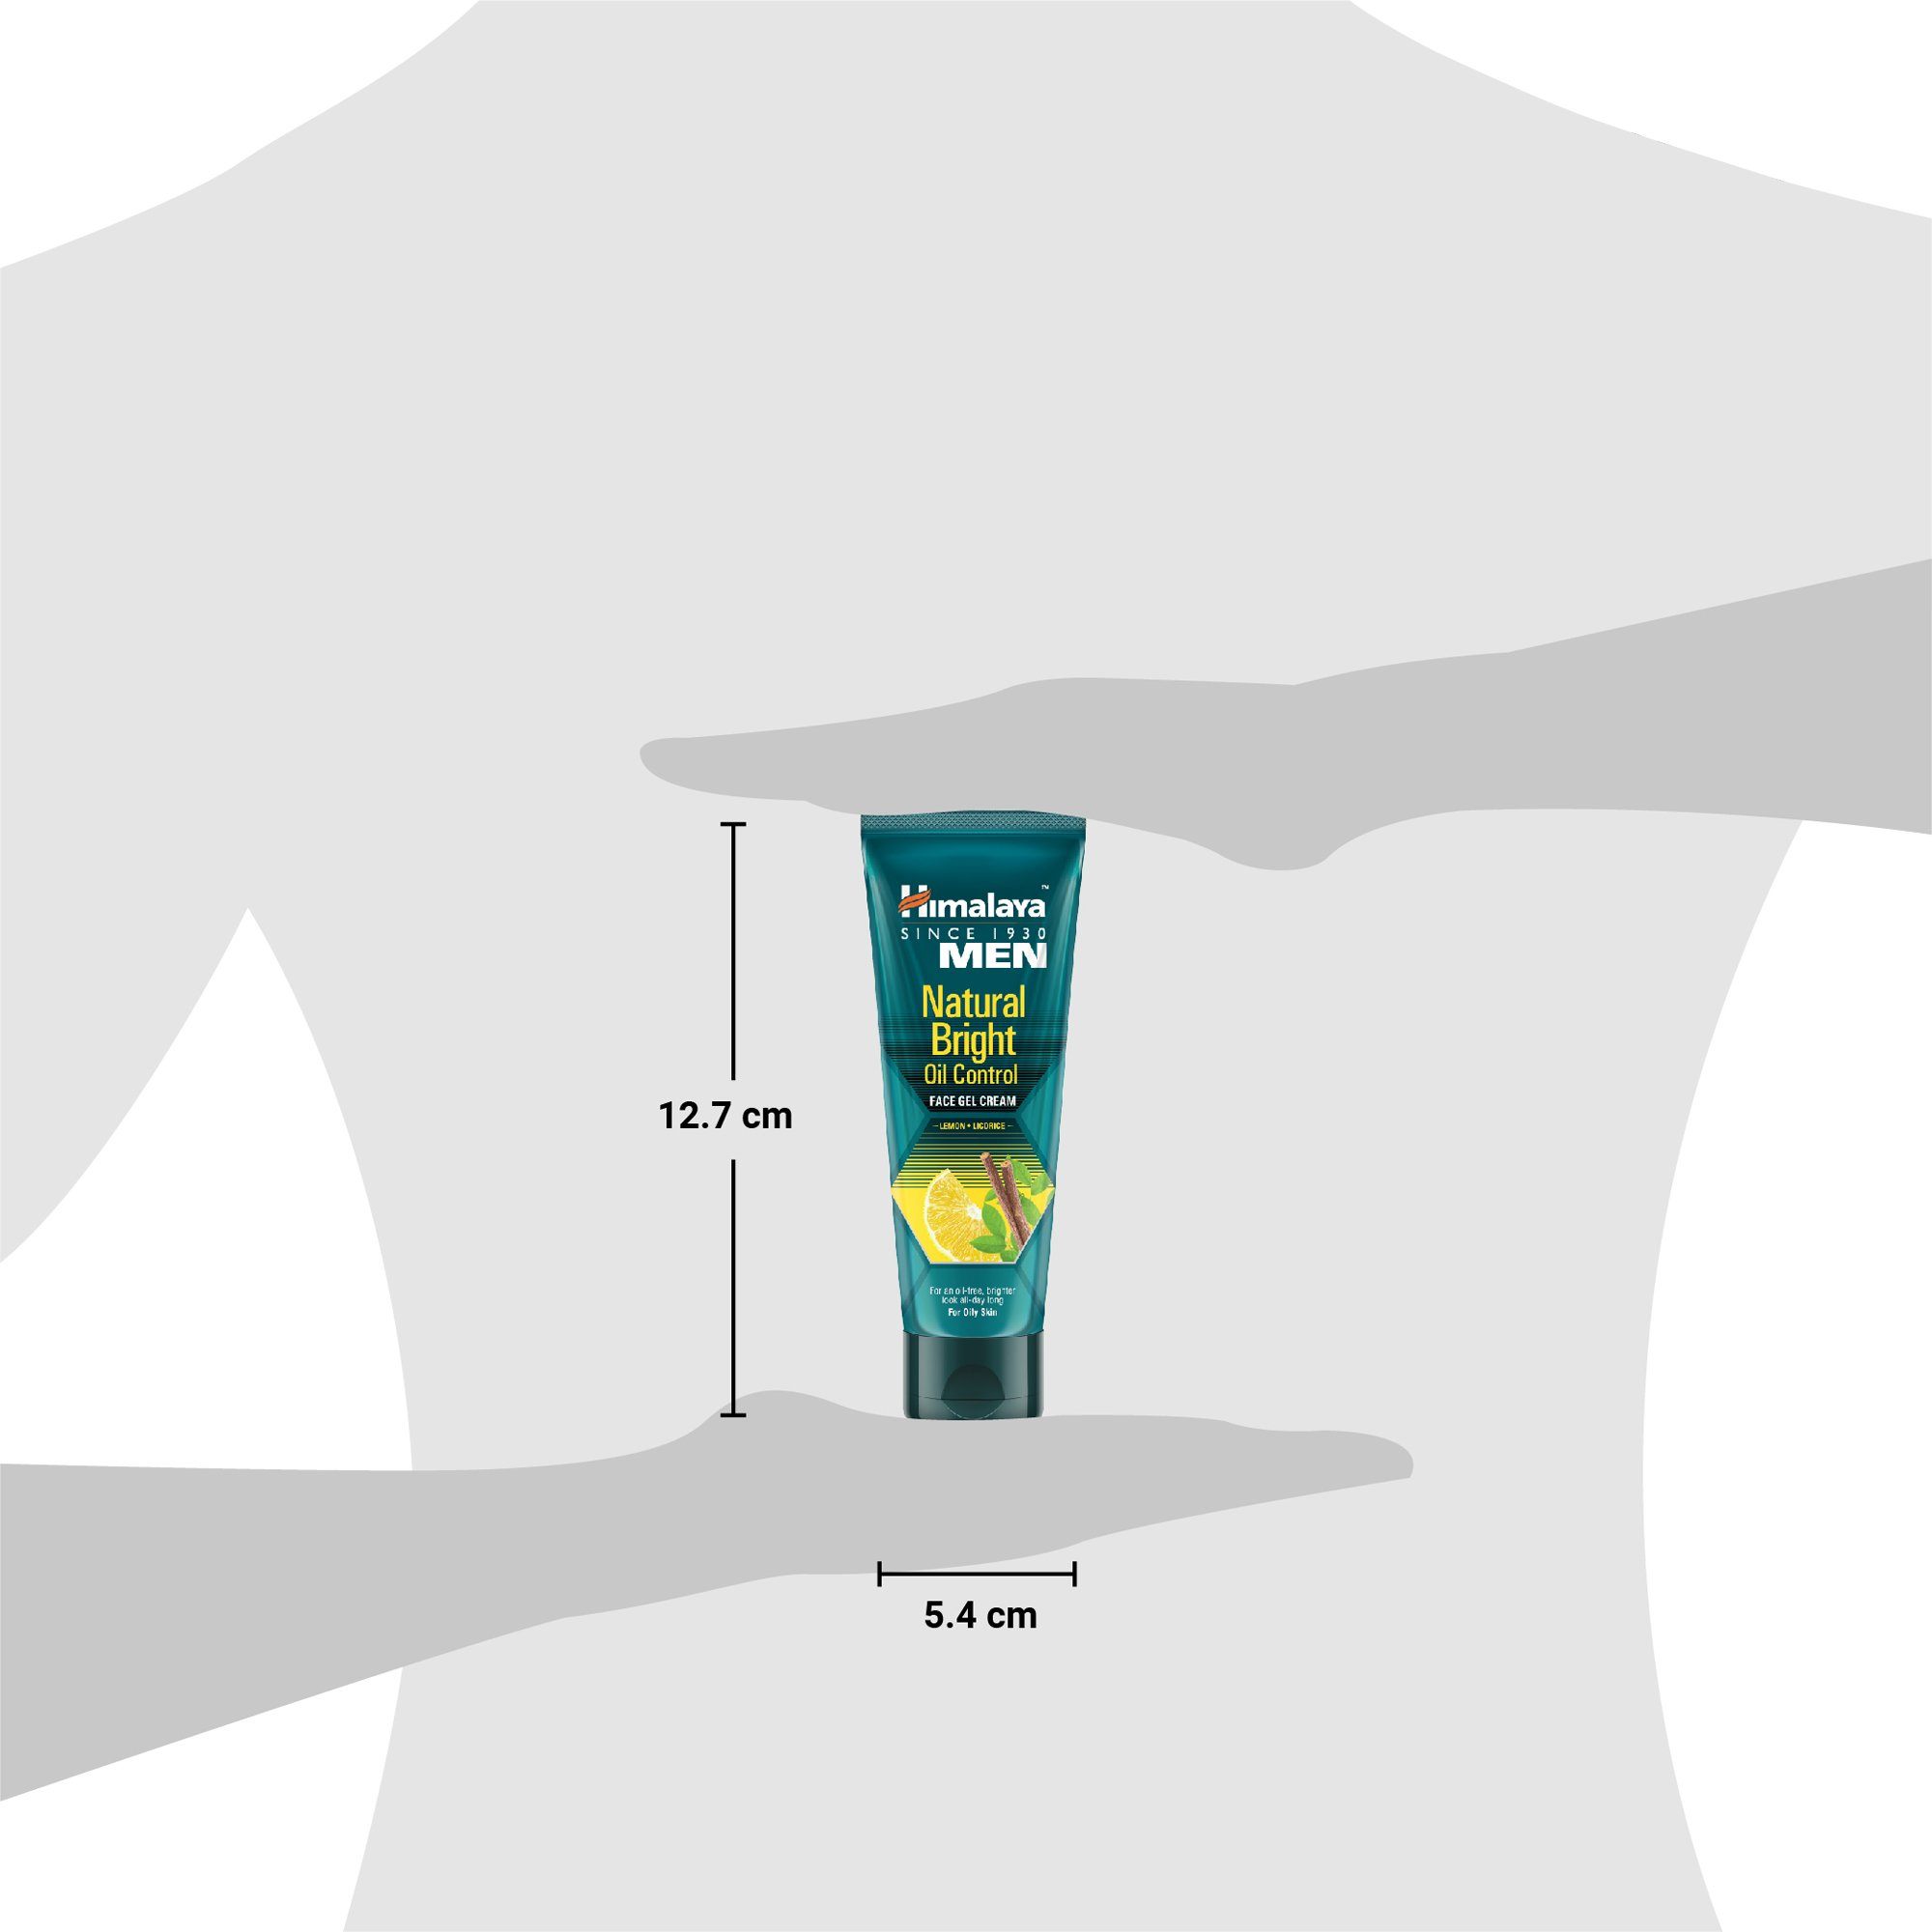 Himalaya Natural Bright Oil Control Men’s Face Cream - Pack Size